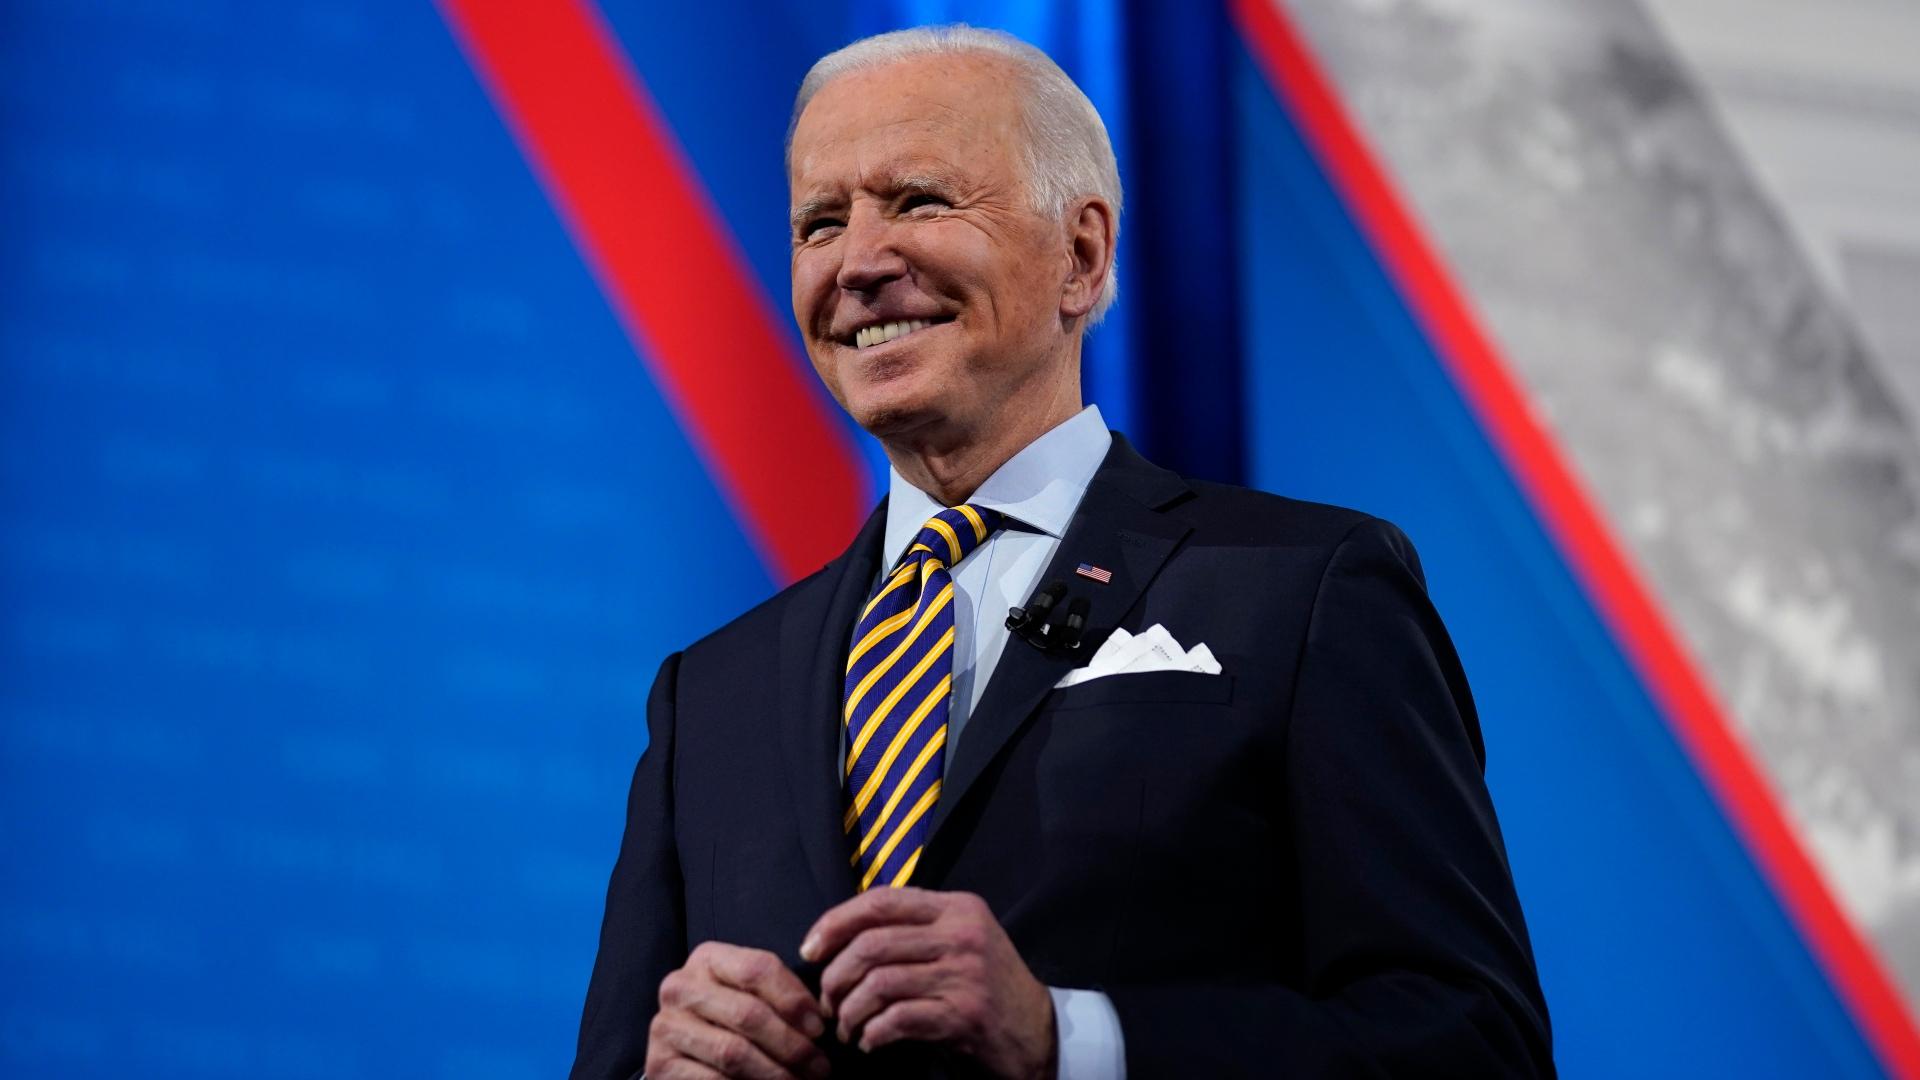 President Joe Biden stands on stage during a break in a televised town hall event at Pabst Theater, Tuesday, Feb. 16, 2021, in Milwaukee. (AP Photo / Evan Vucci)